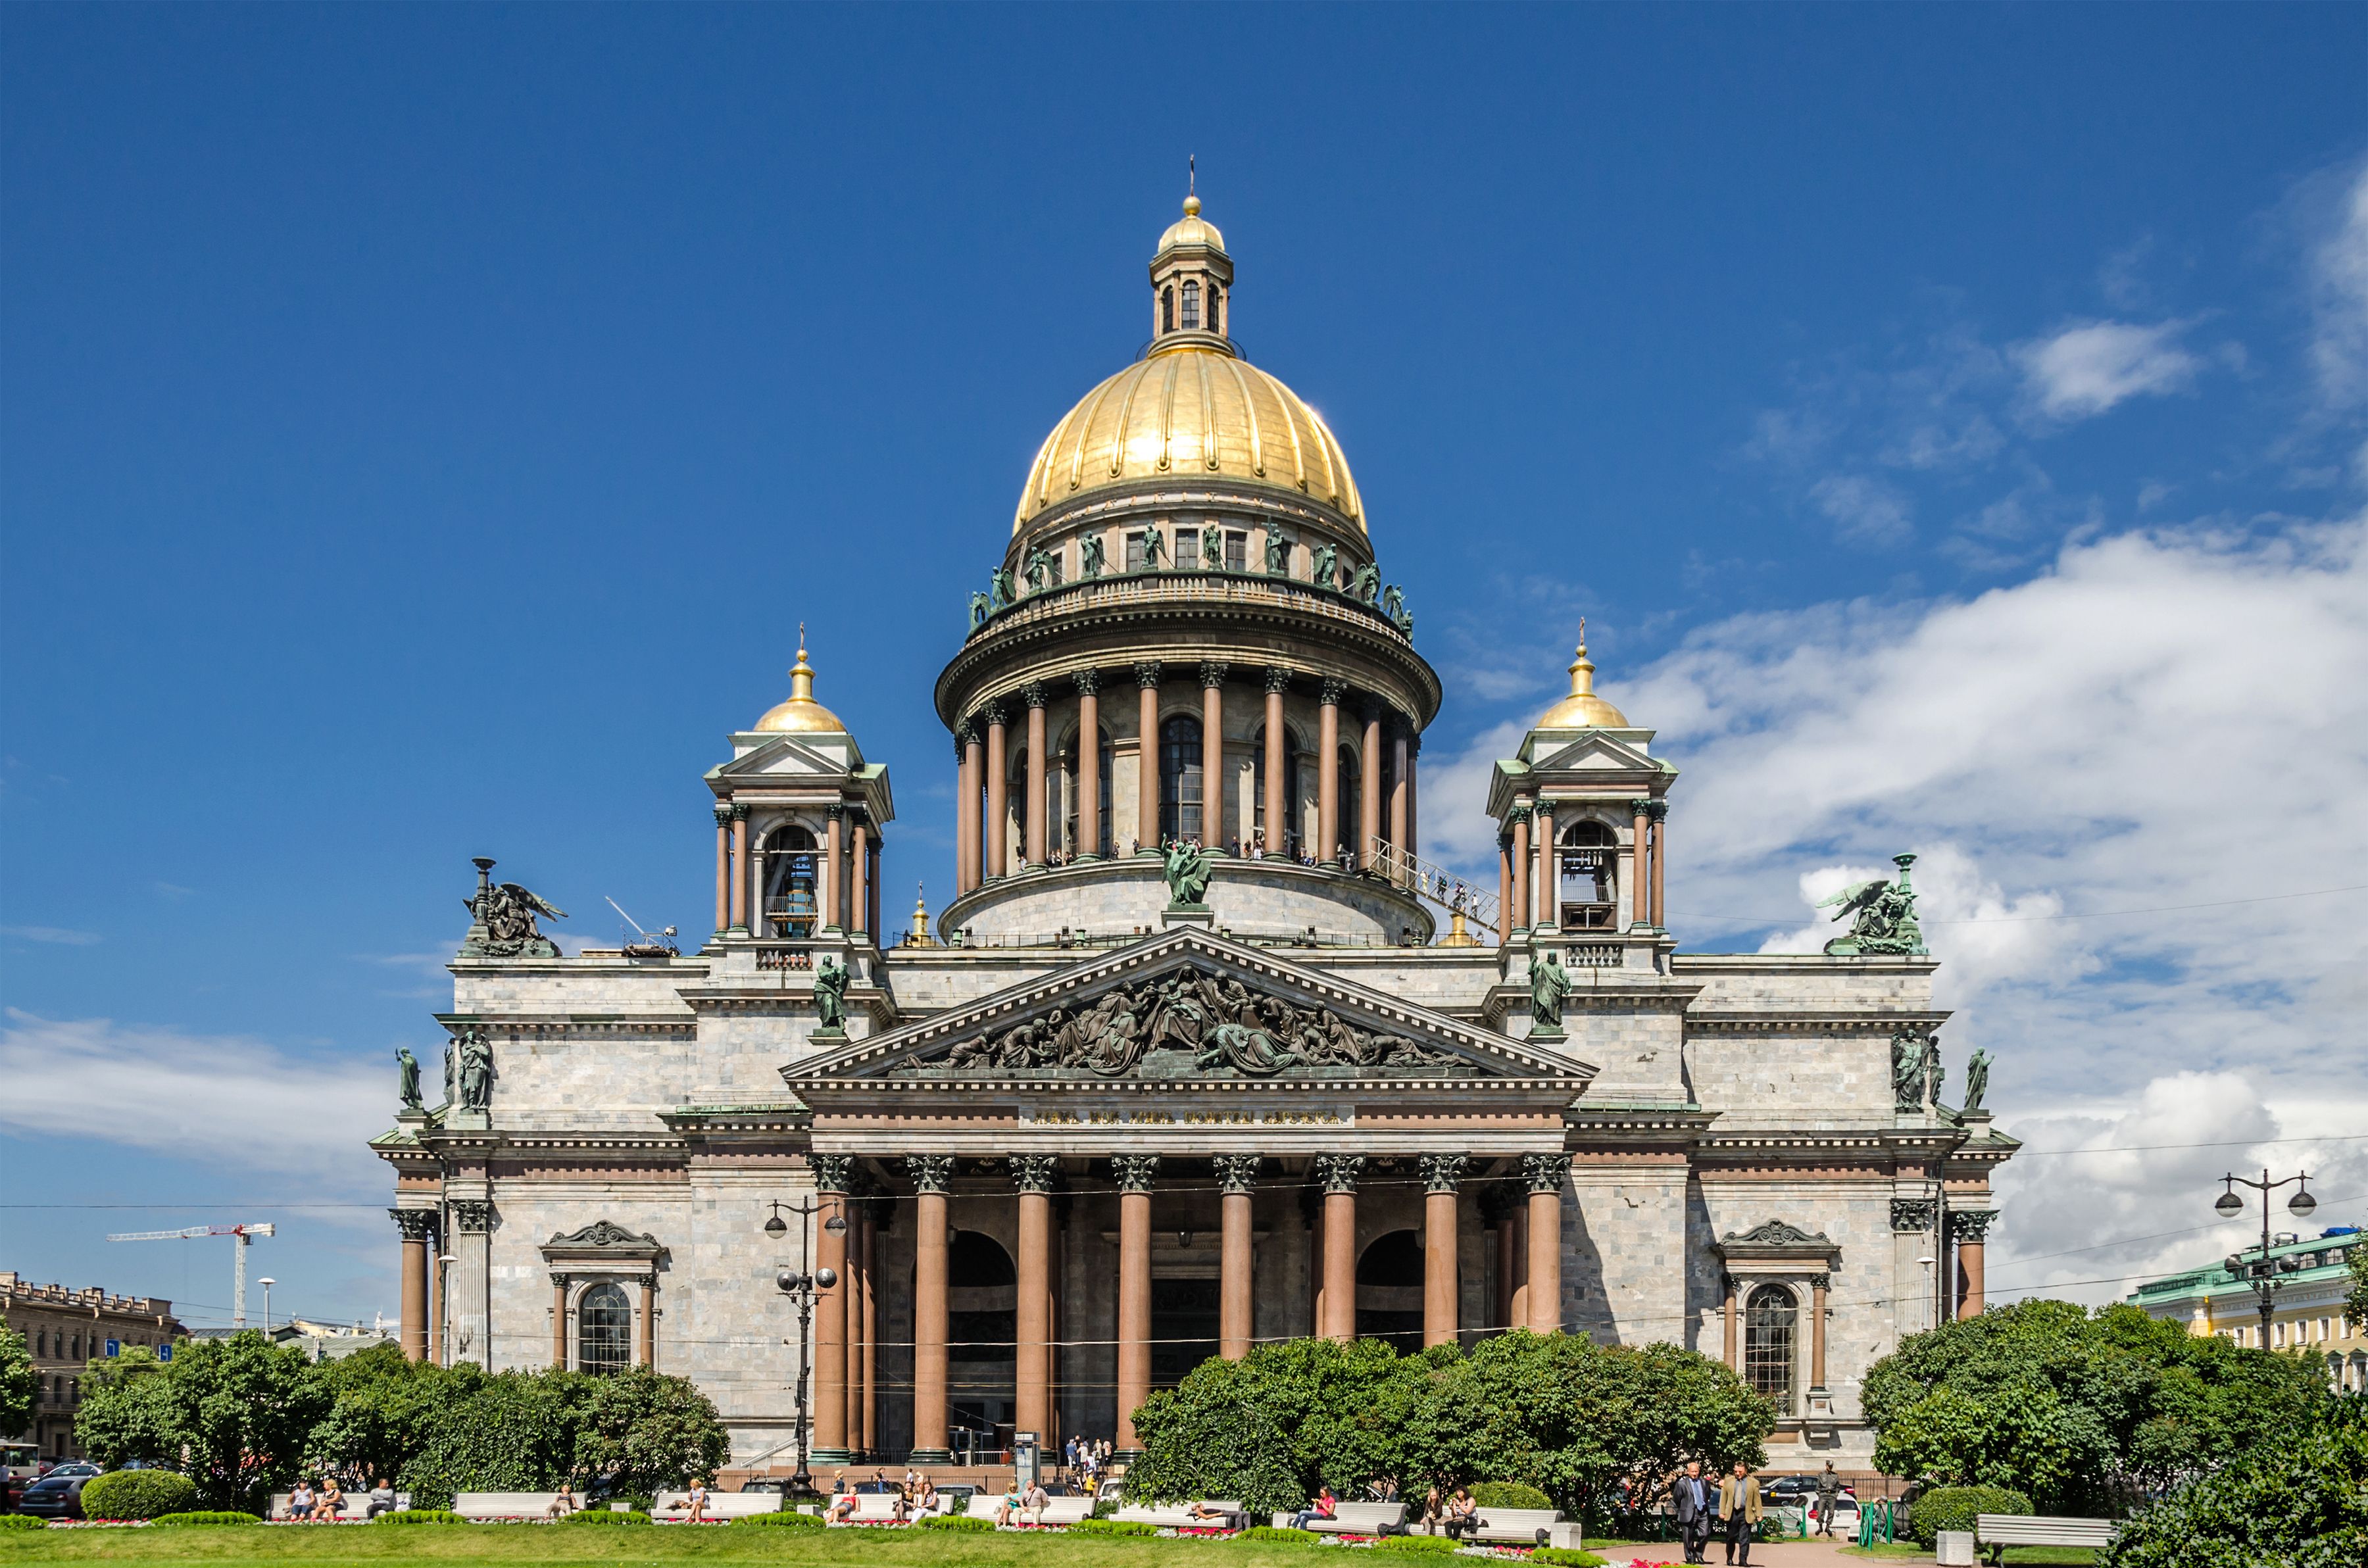 File:Saint Isaac's Cathedral in SPB.jpeg - Wikimedia Commons